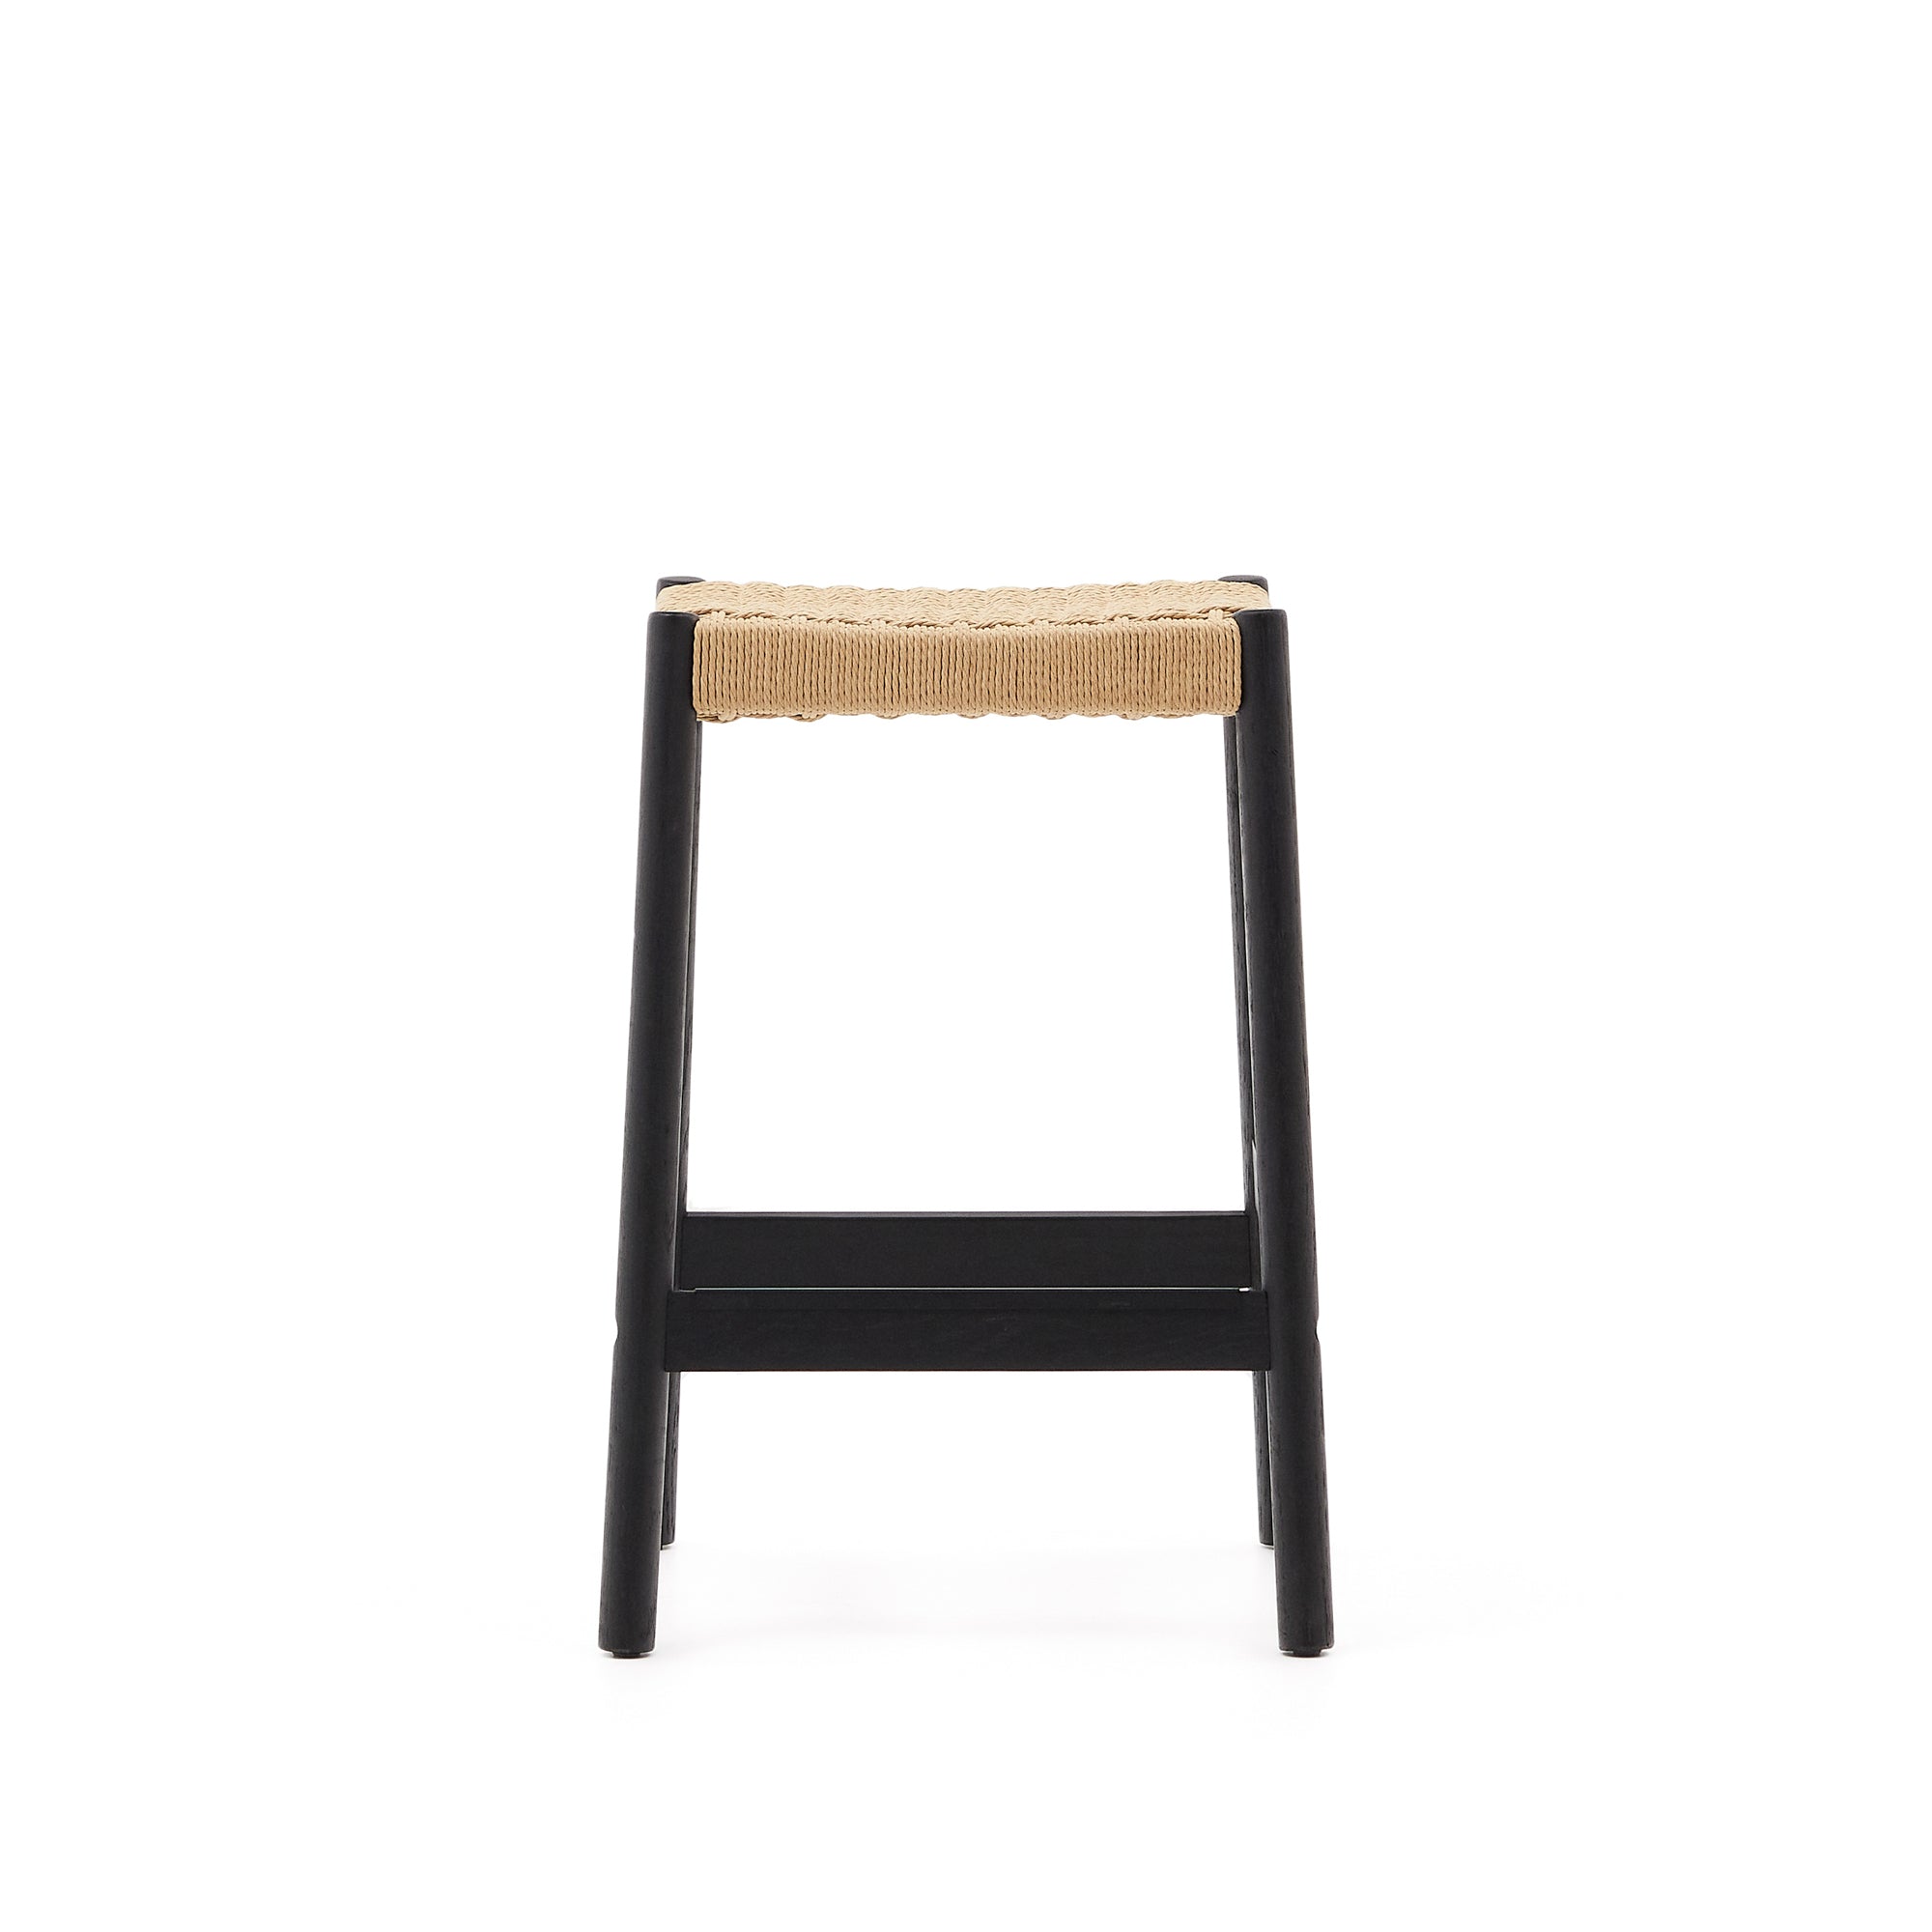 Yalia stool in solid oak with black finish and rope rope, height 65 cm 100% FSC